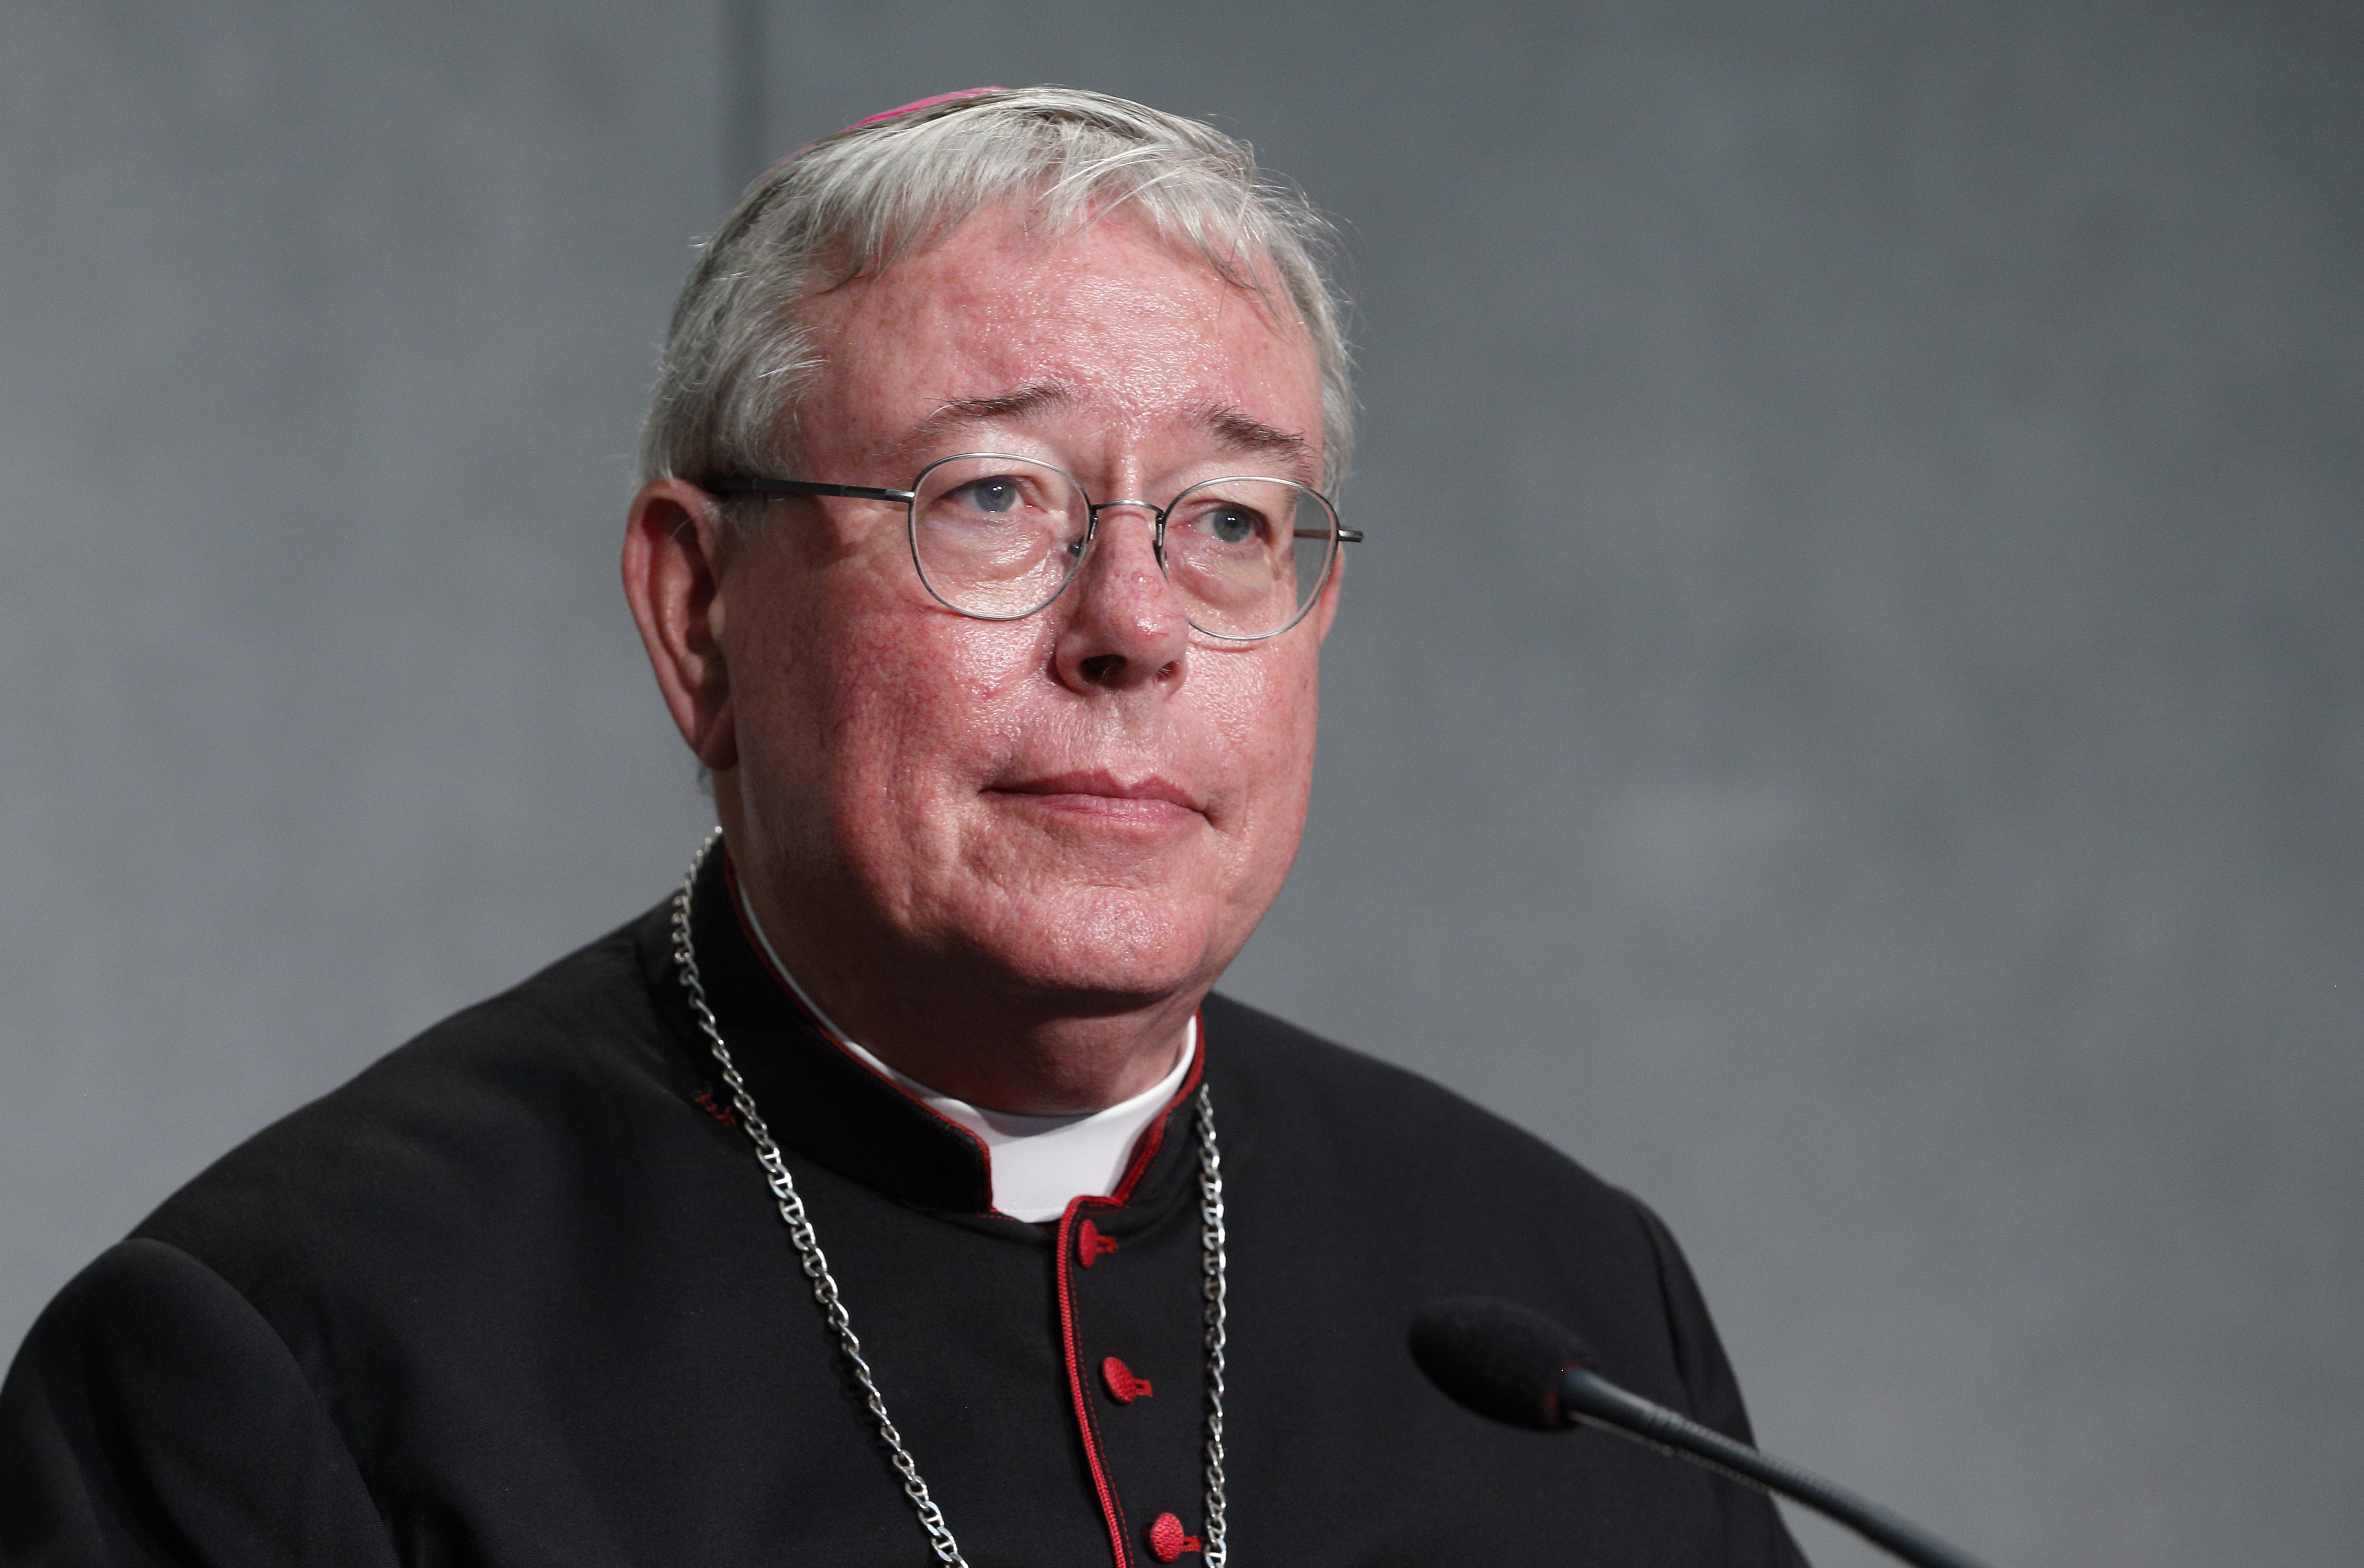 Populism is pushing democracy to the brink, warns new cardinal